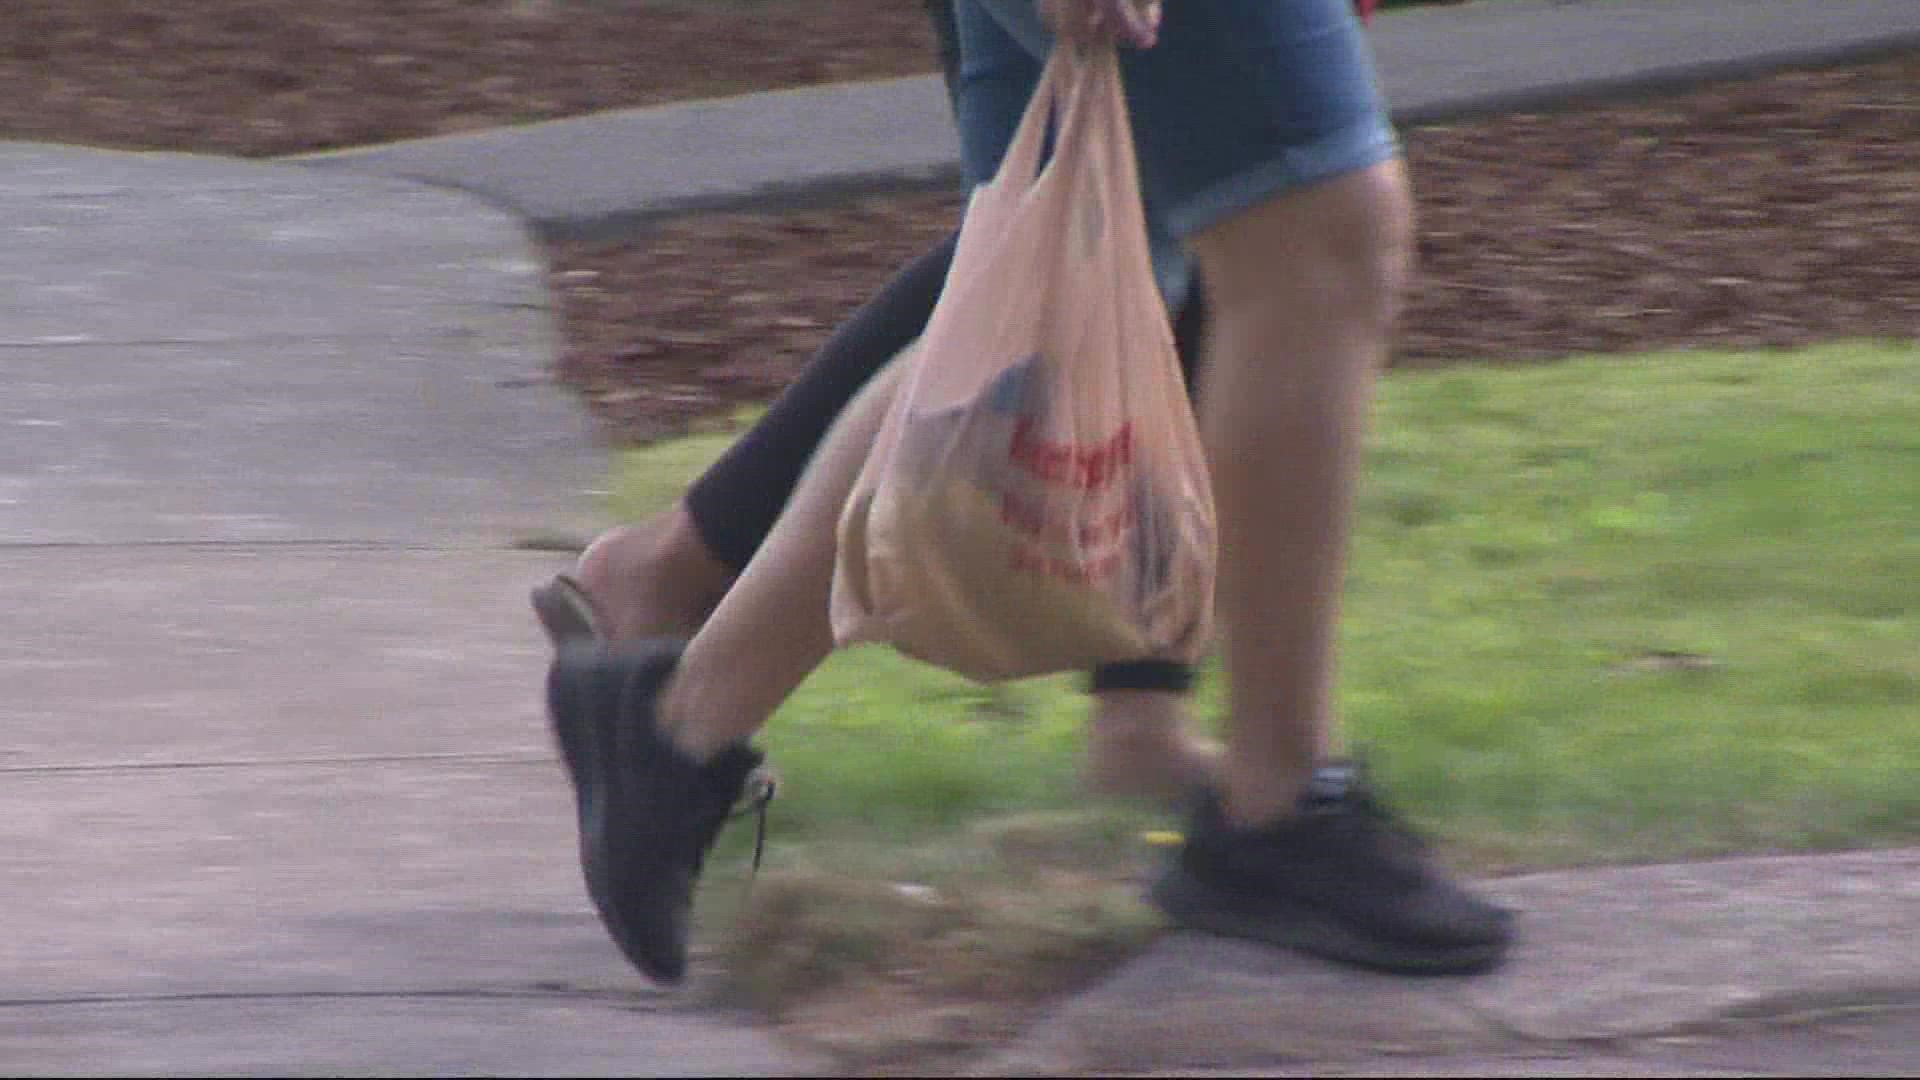 The state ban on single use plastic goes into effect on Oct. 1. Stores will provide paper bags or reusable plastic ones for eight cents each.